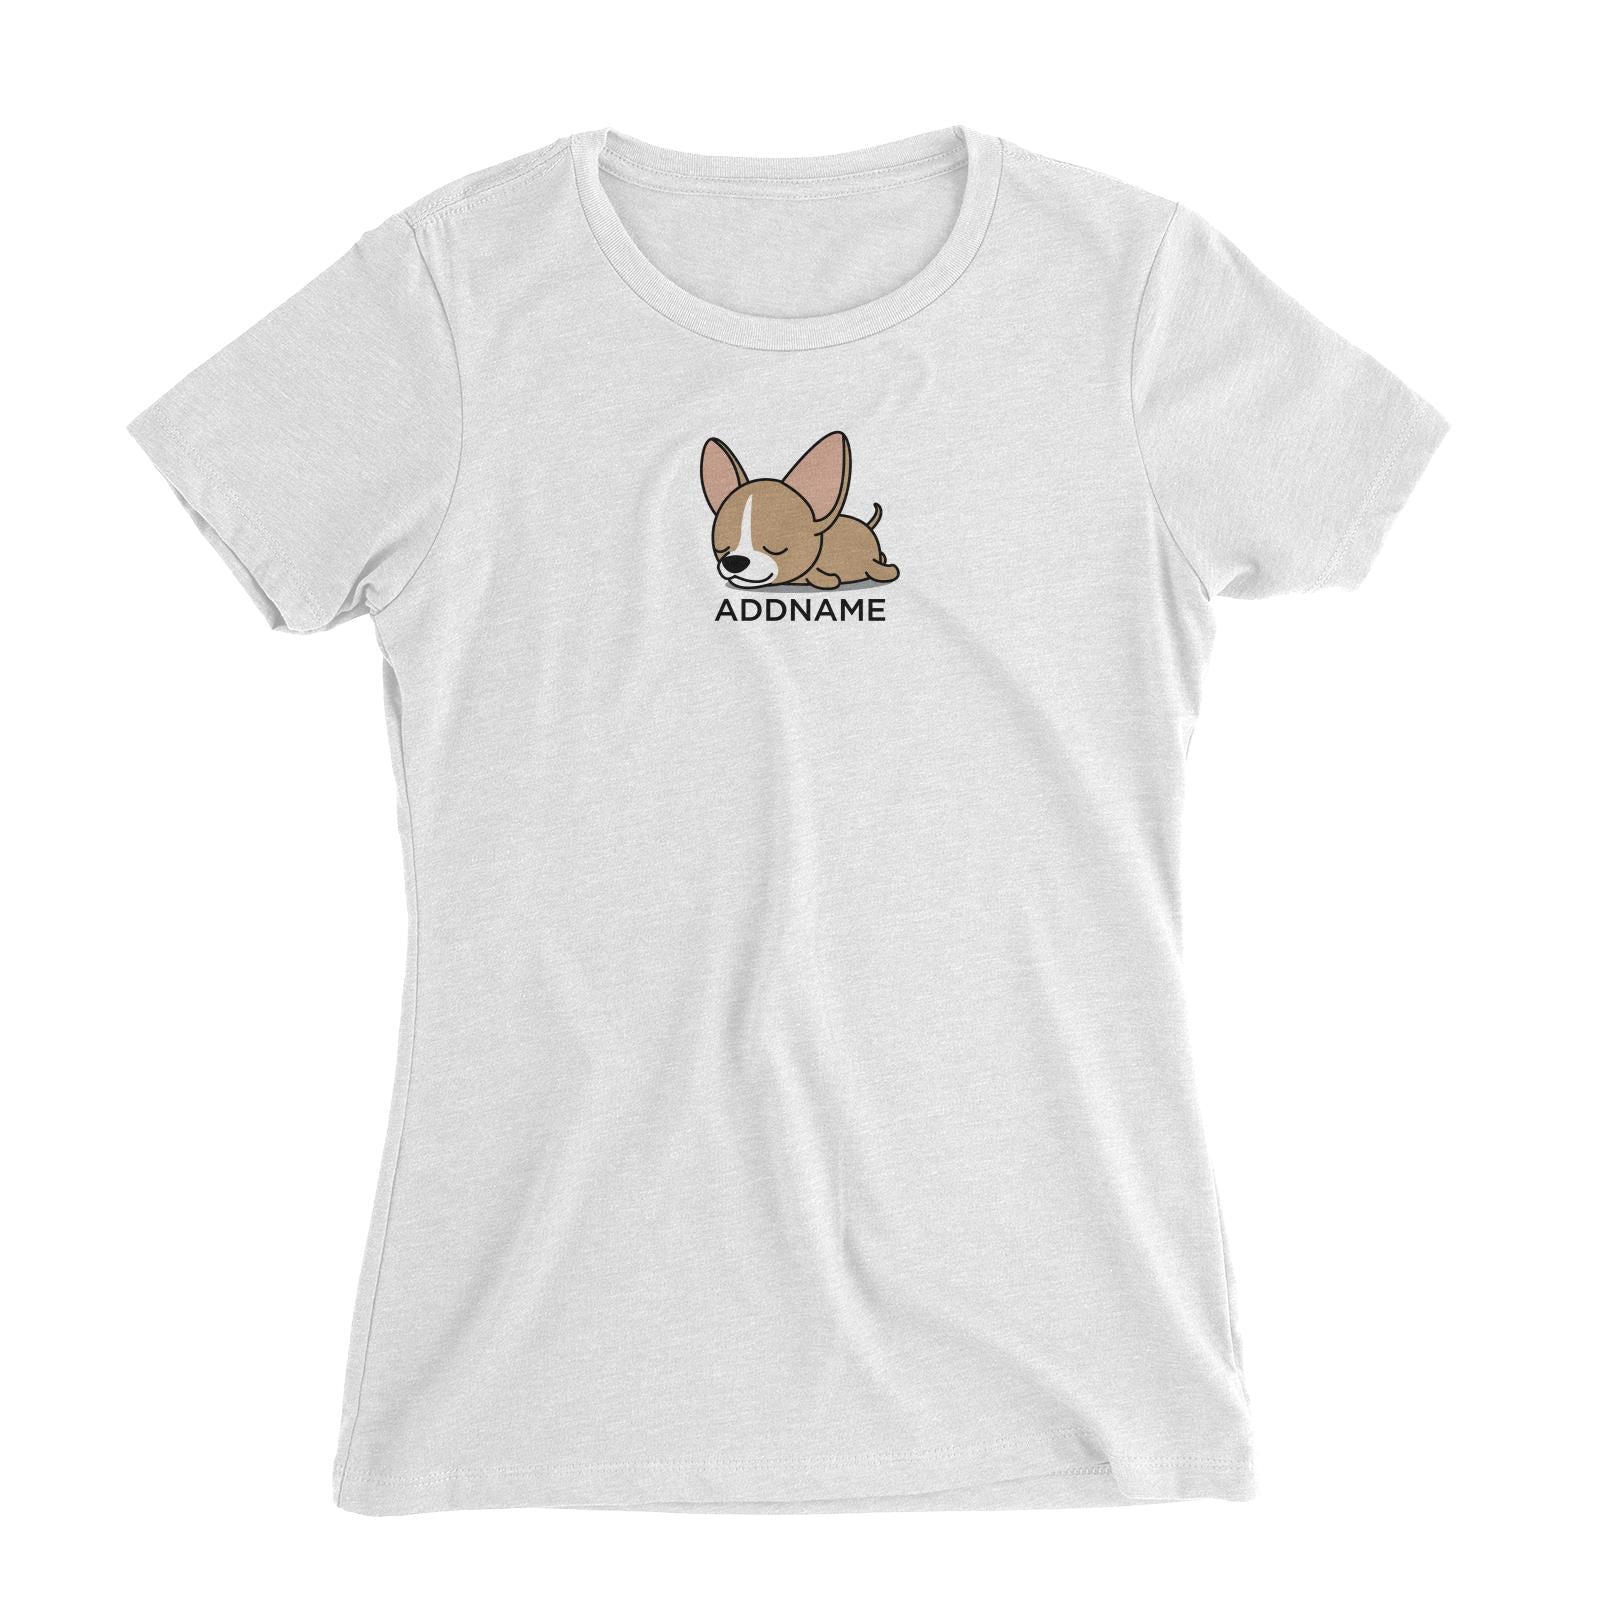 Lazy Chihuahua Dog Addname Women's Slim Fit T-Shirt